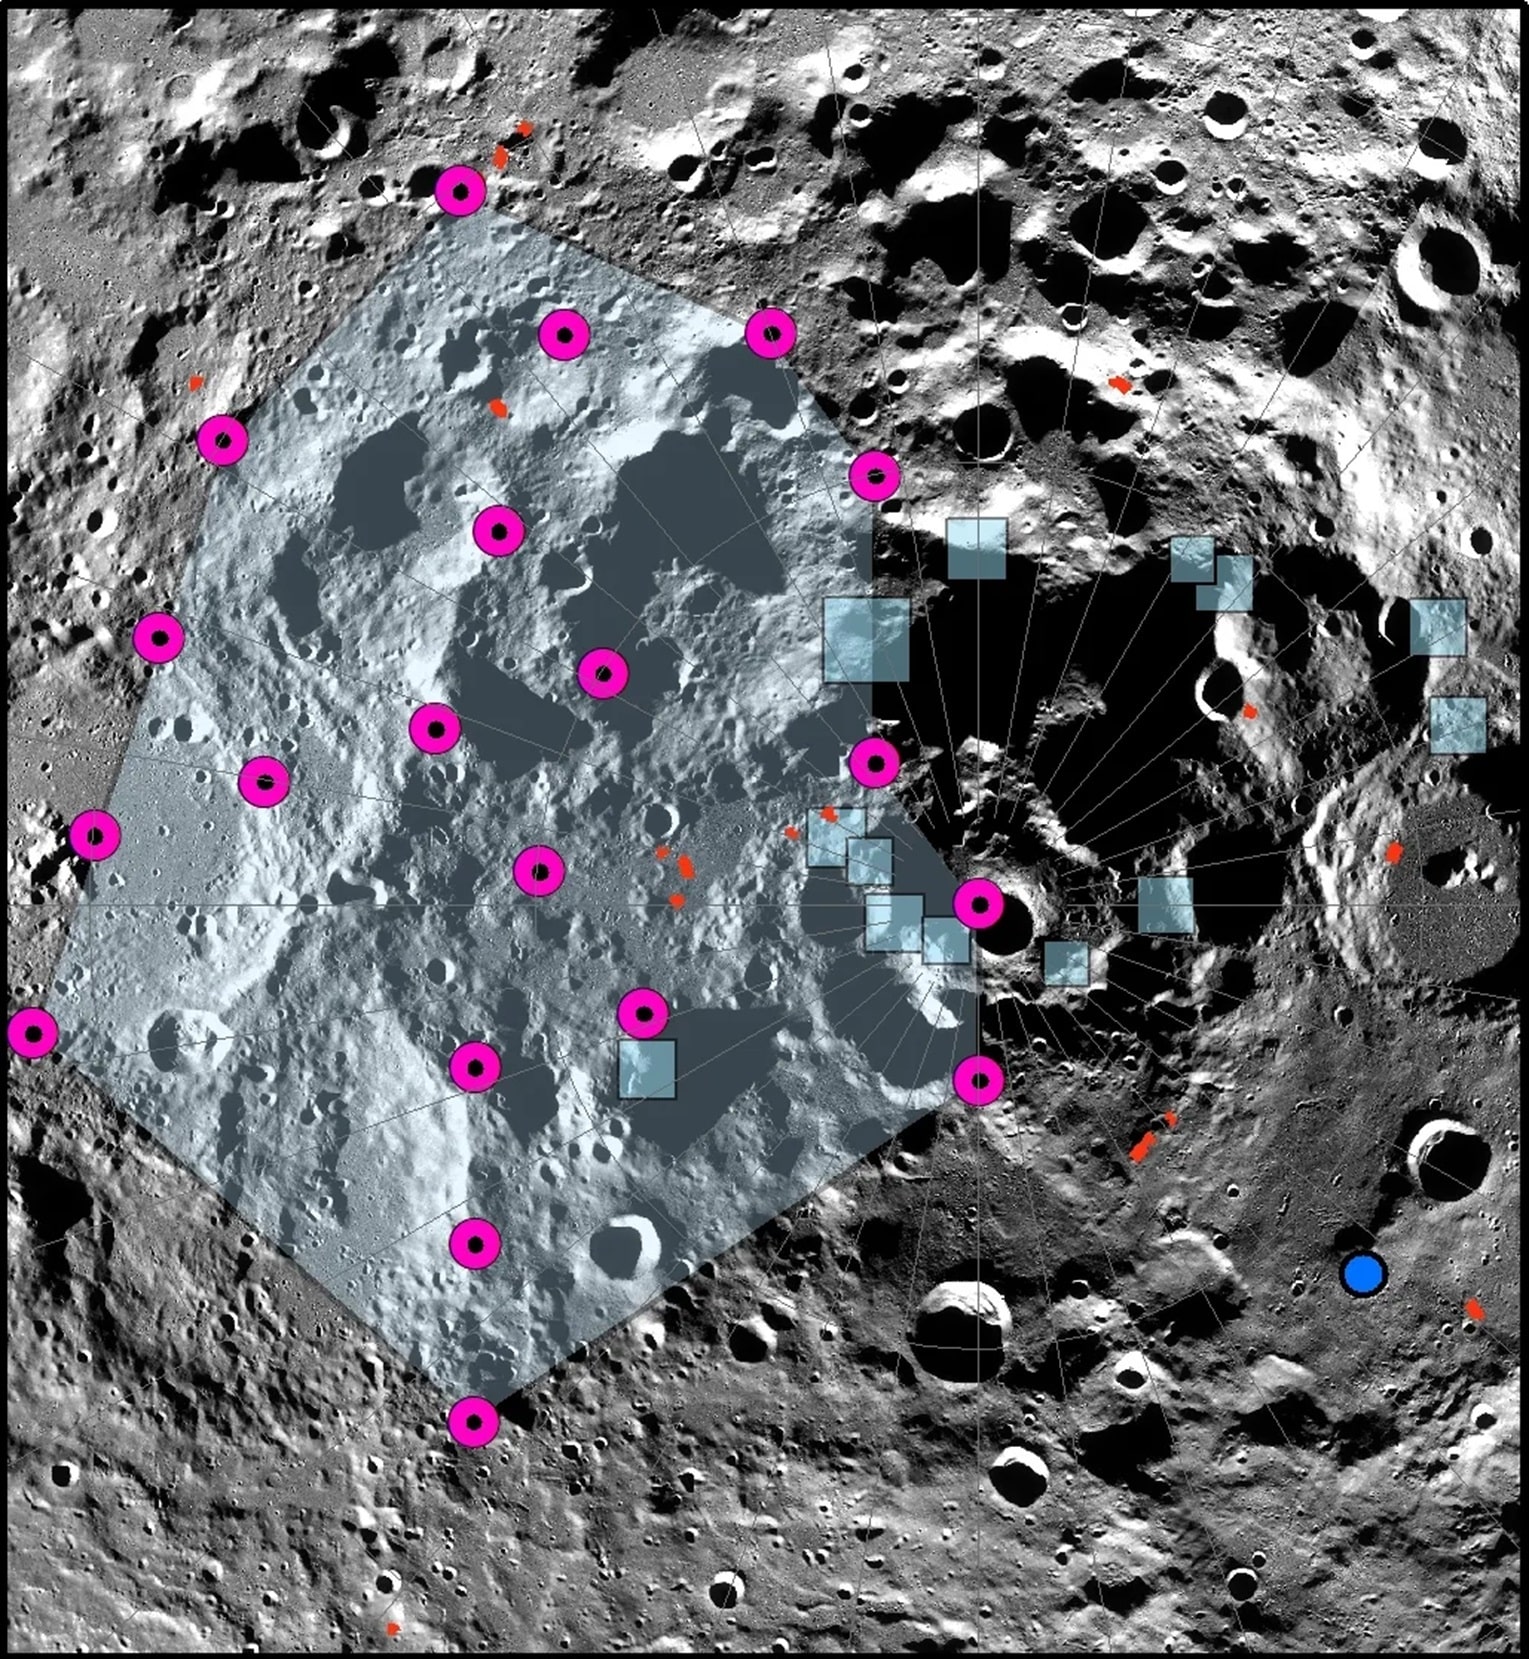 The epicenter of one of the strongest moonquakes